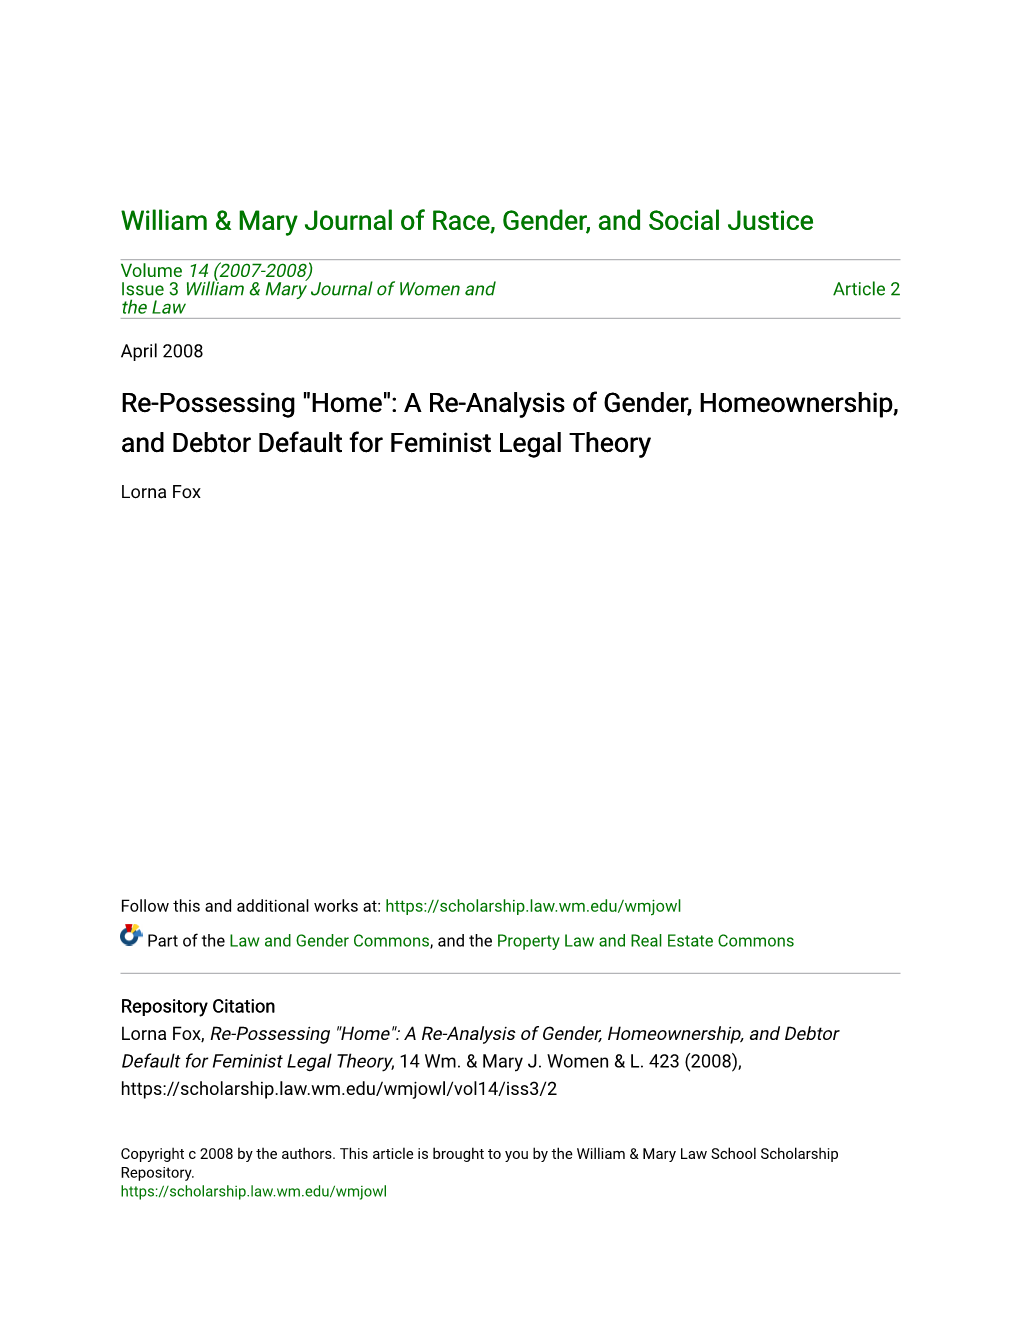 "Home": a Re-Analysis of Gender, Homeownership, and Debtor Default for Feminist Legal Theory